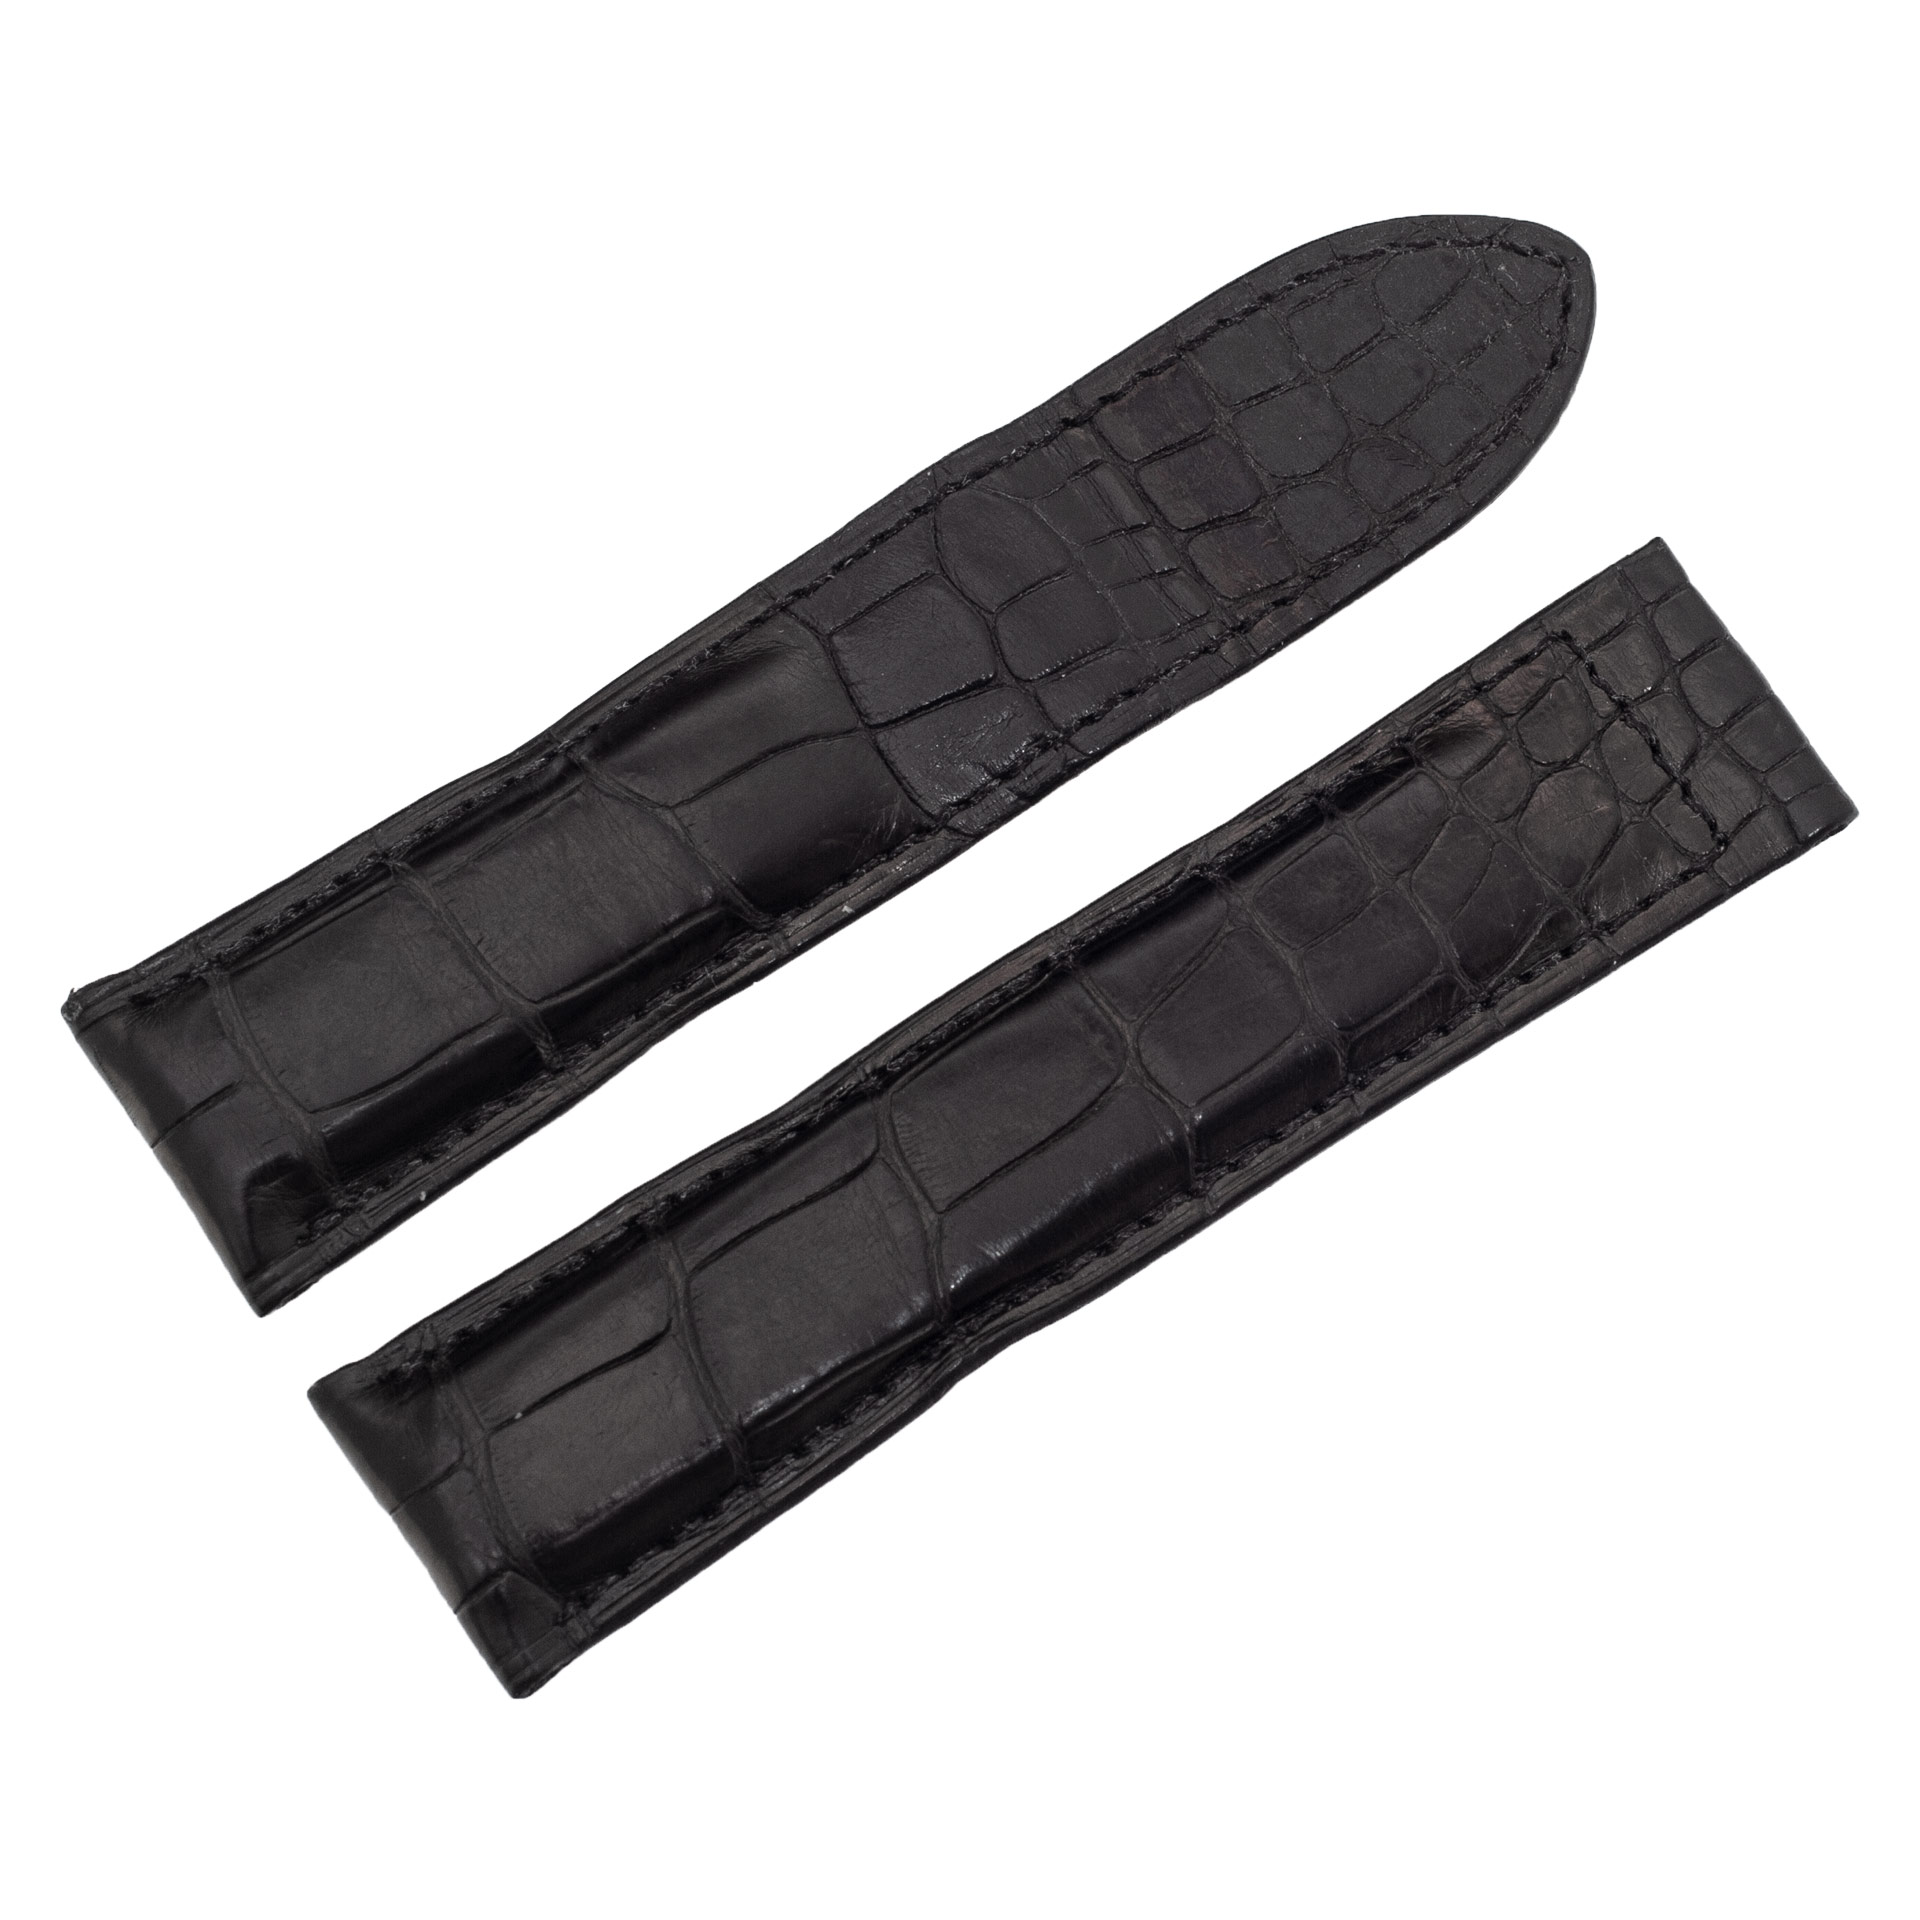 Cartier black alligator strap for a deployment buckle at 18mm x 17mm